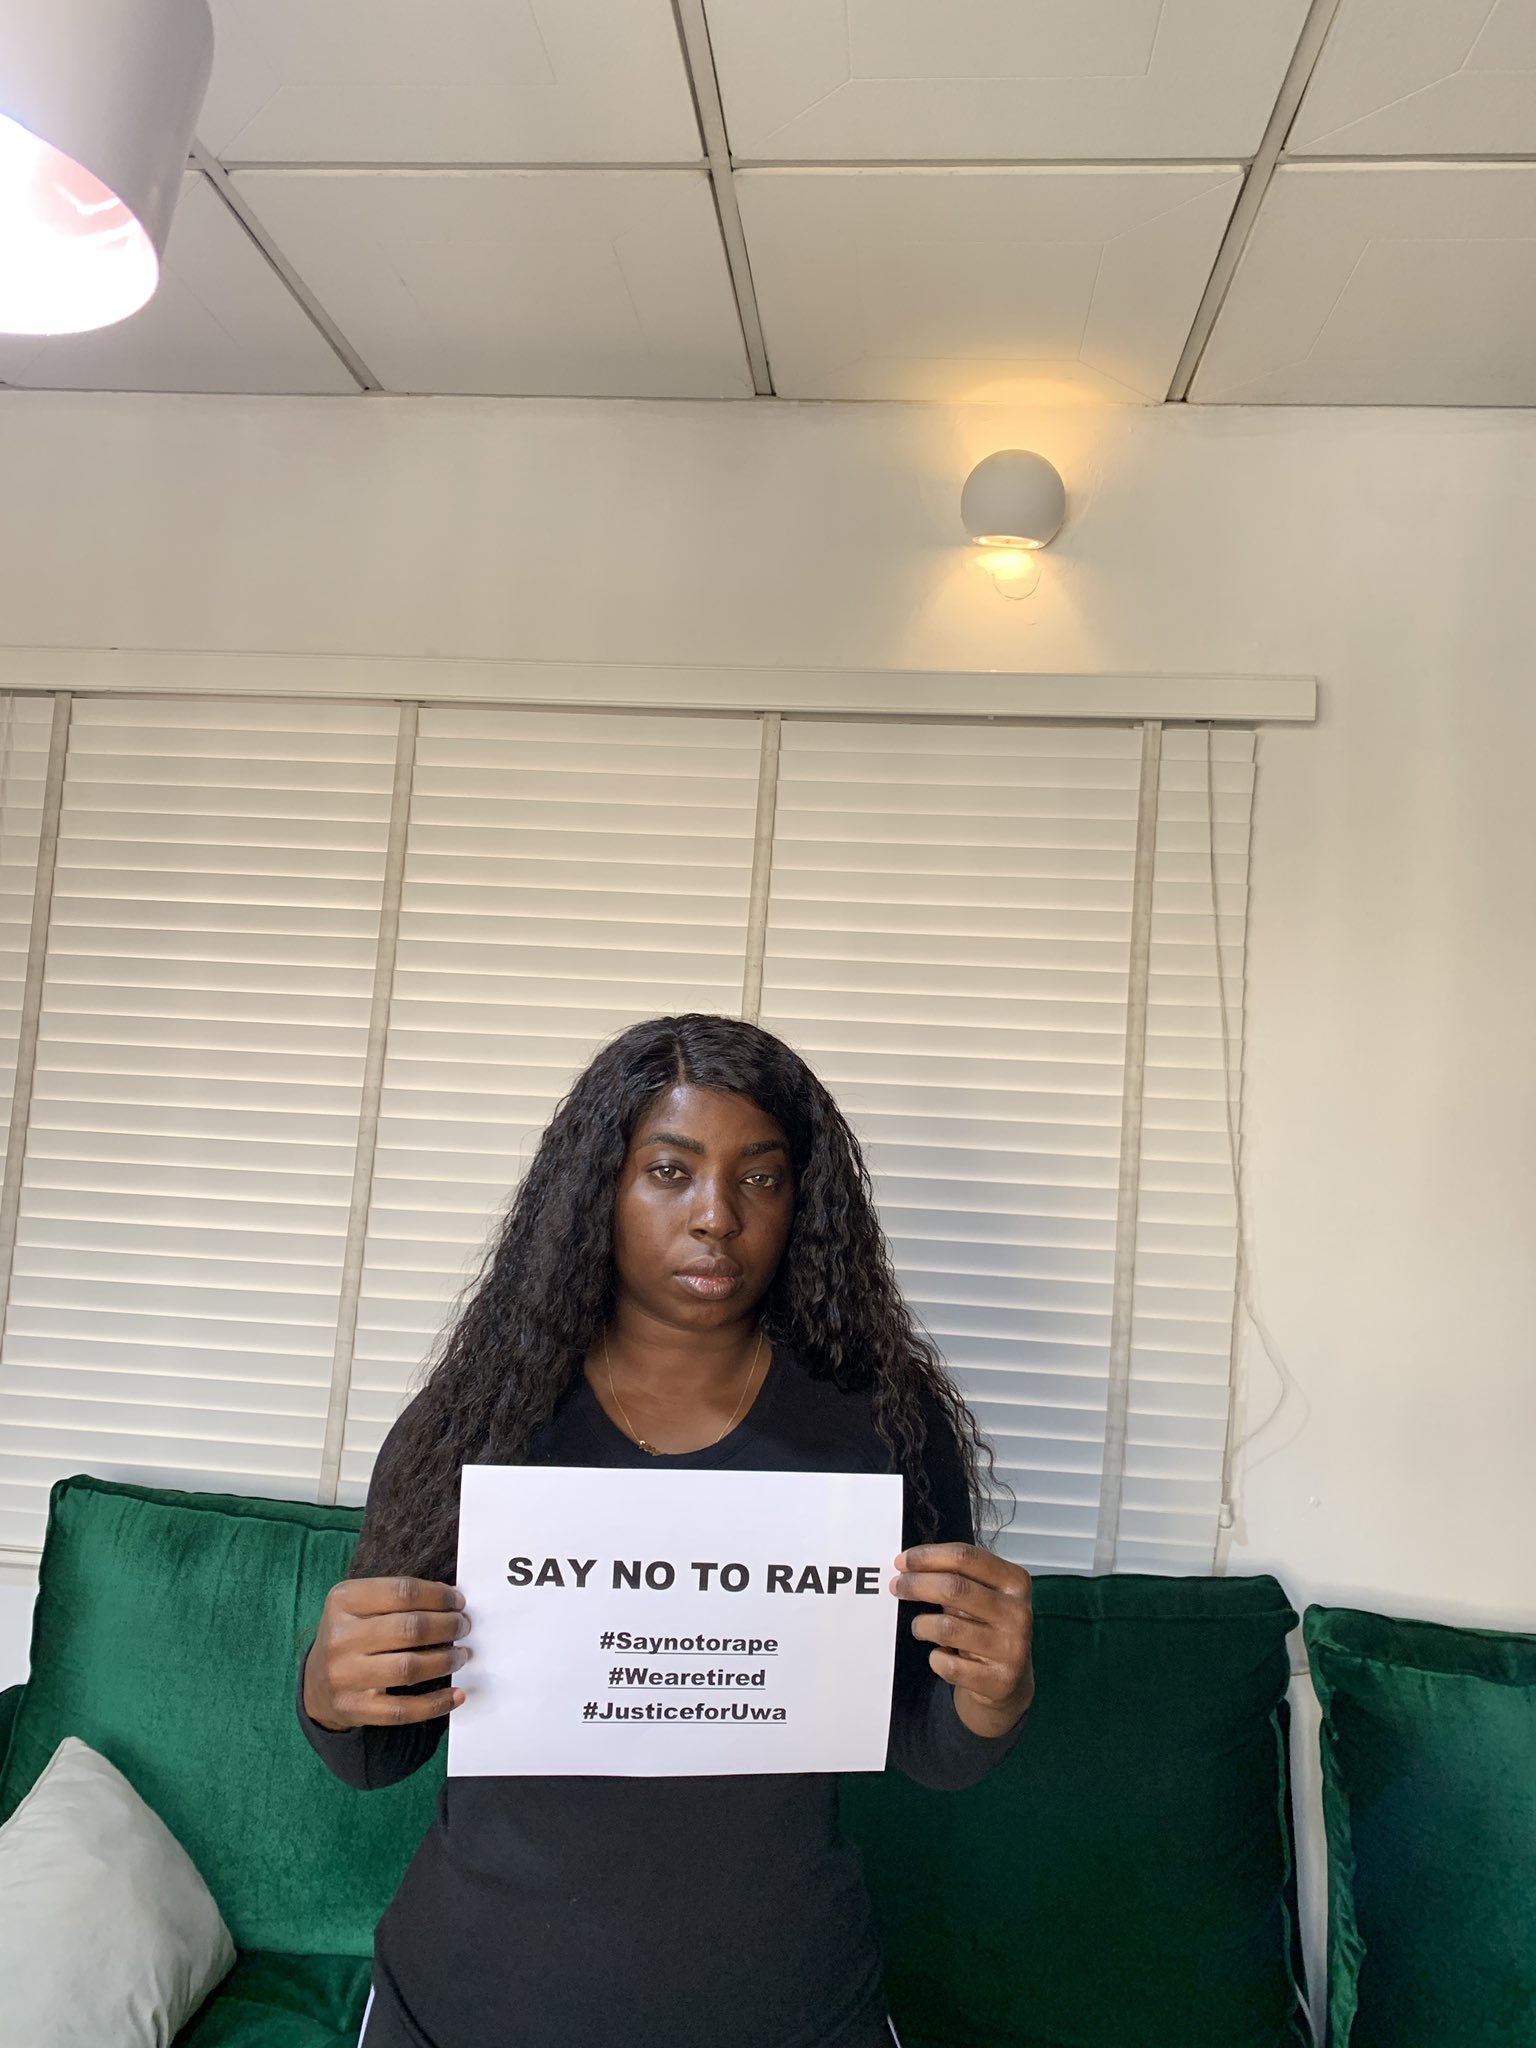 More Nigerians Join in the Online Protest calling for Justice for Uwa, Tina